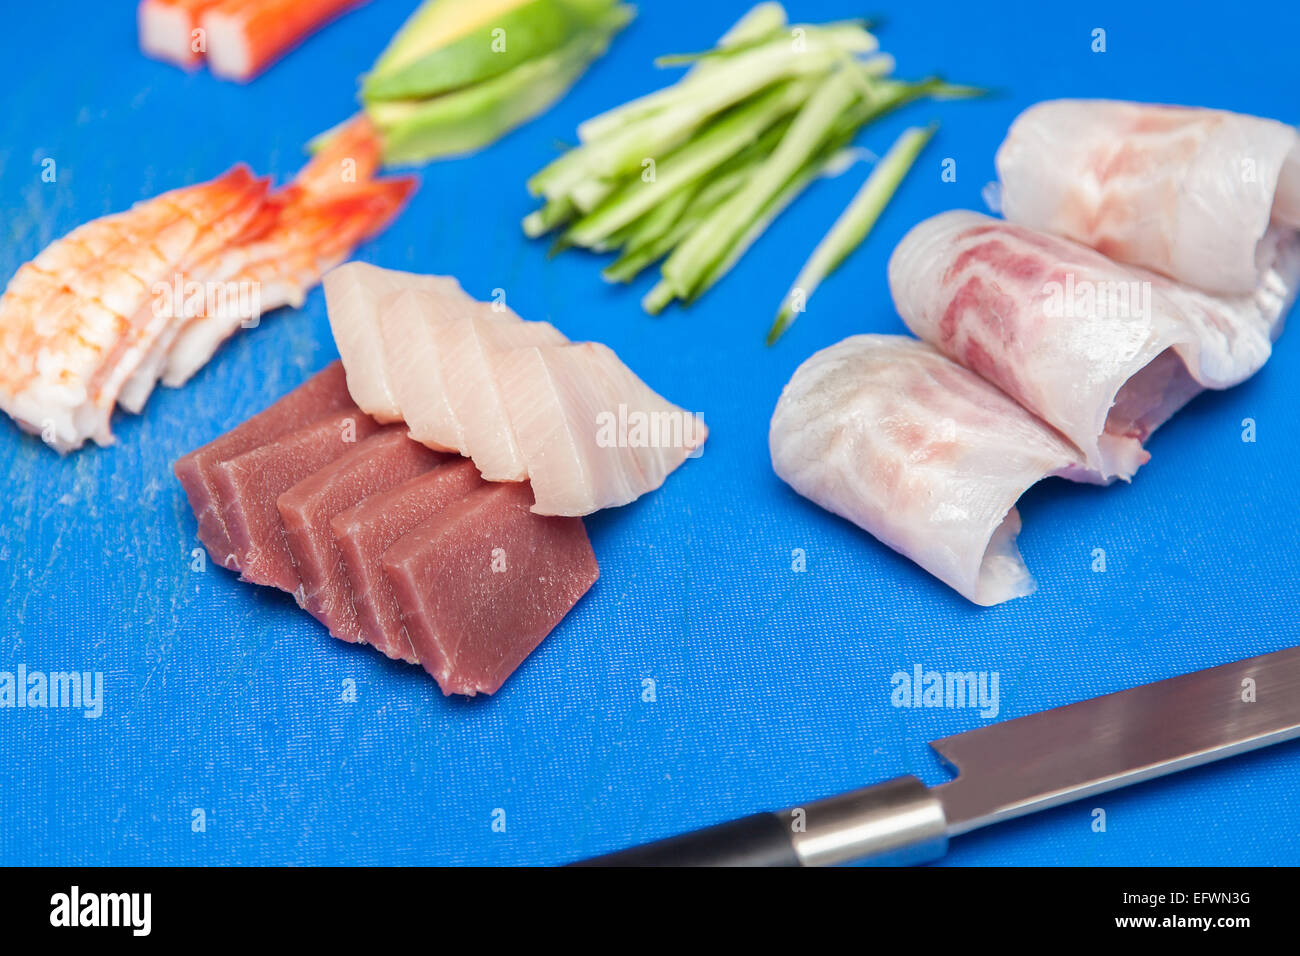 Japanese seafood ready for sushi on blue chopped board Stock Photo